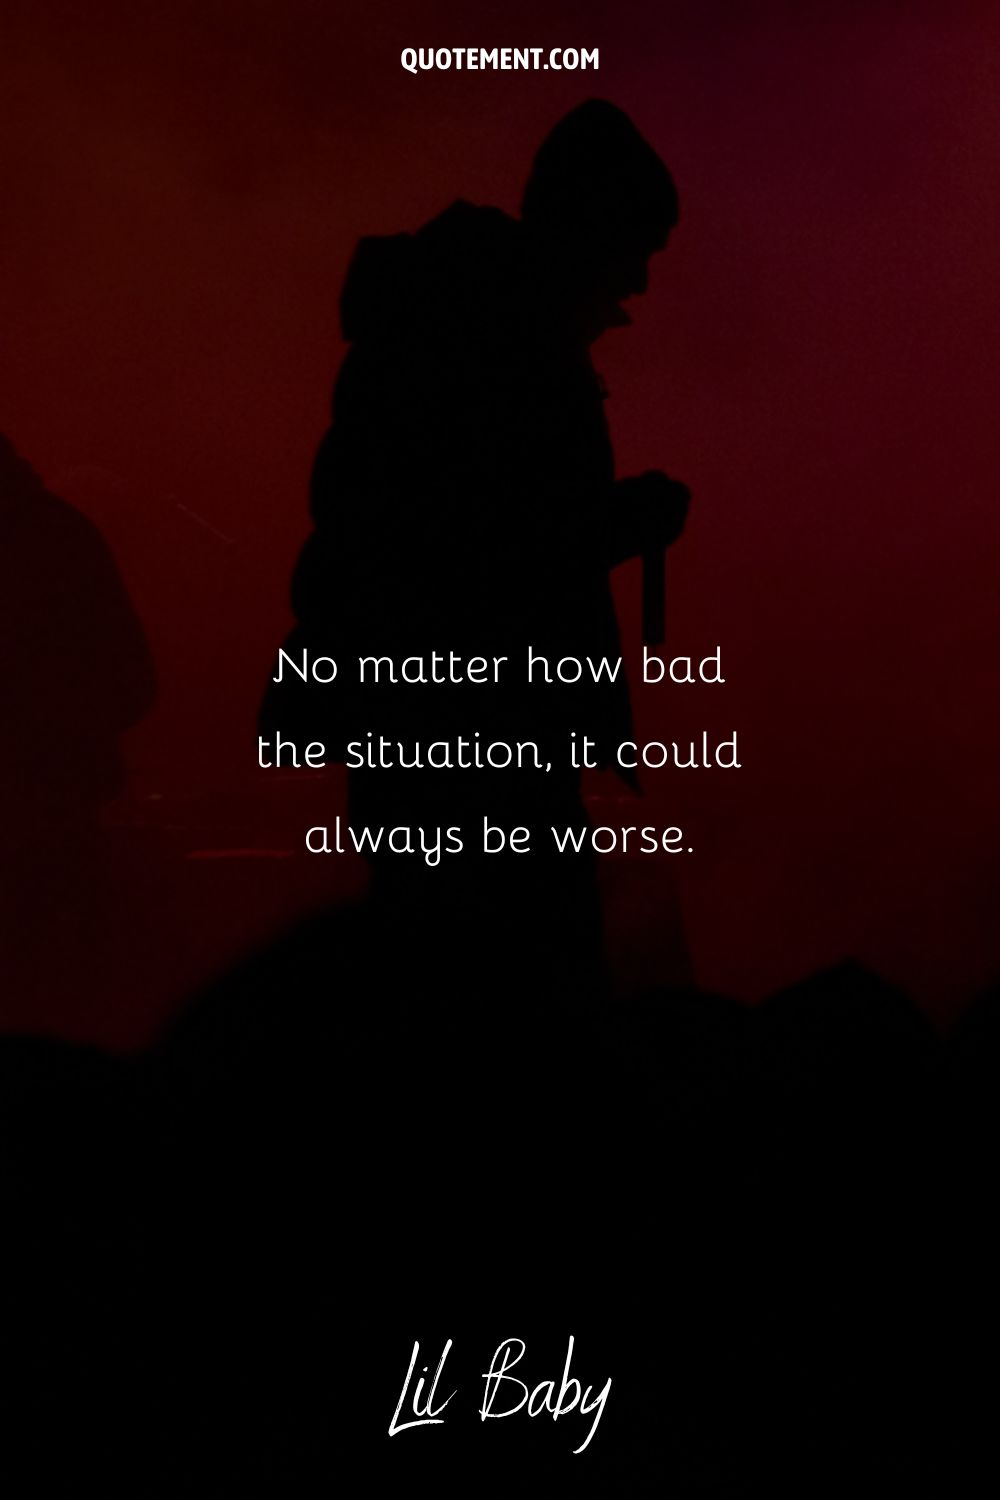 silhouette of lil baby behind a quote representing life situations